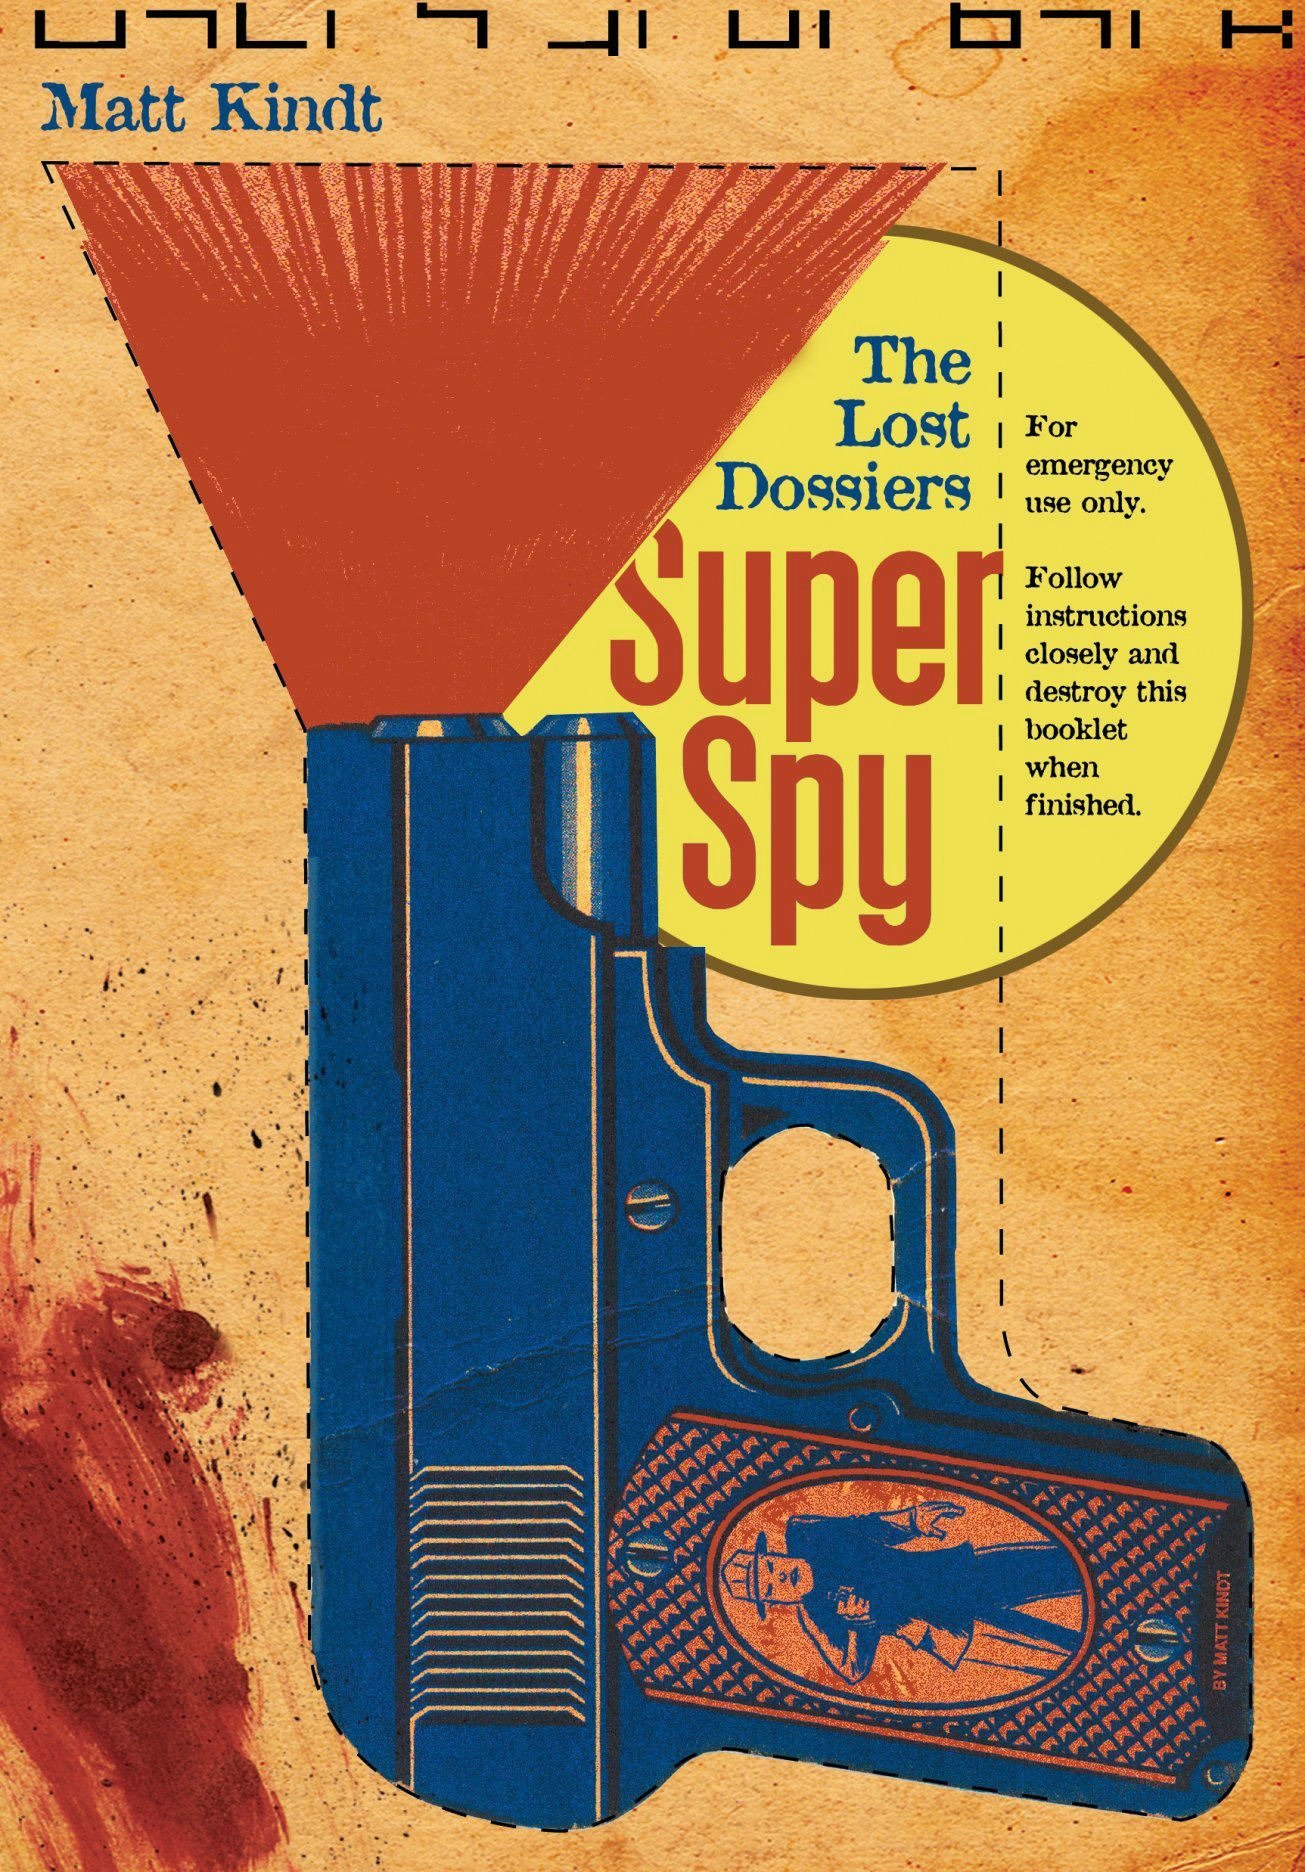 Super Spy Lost Dossiers Graphic Novel